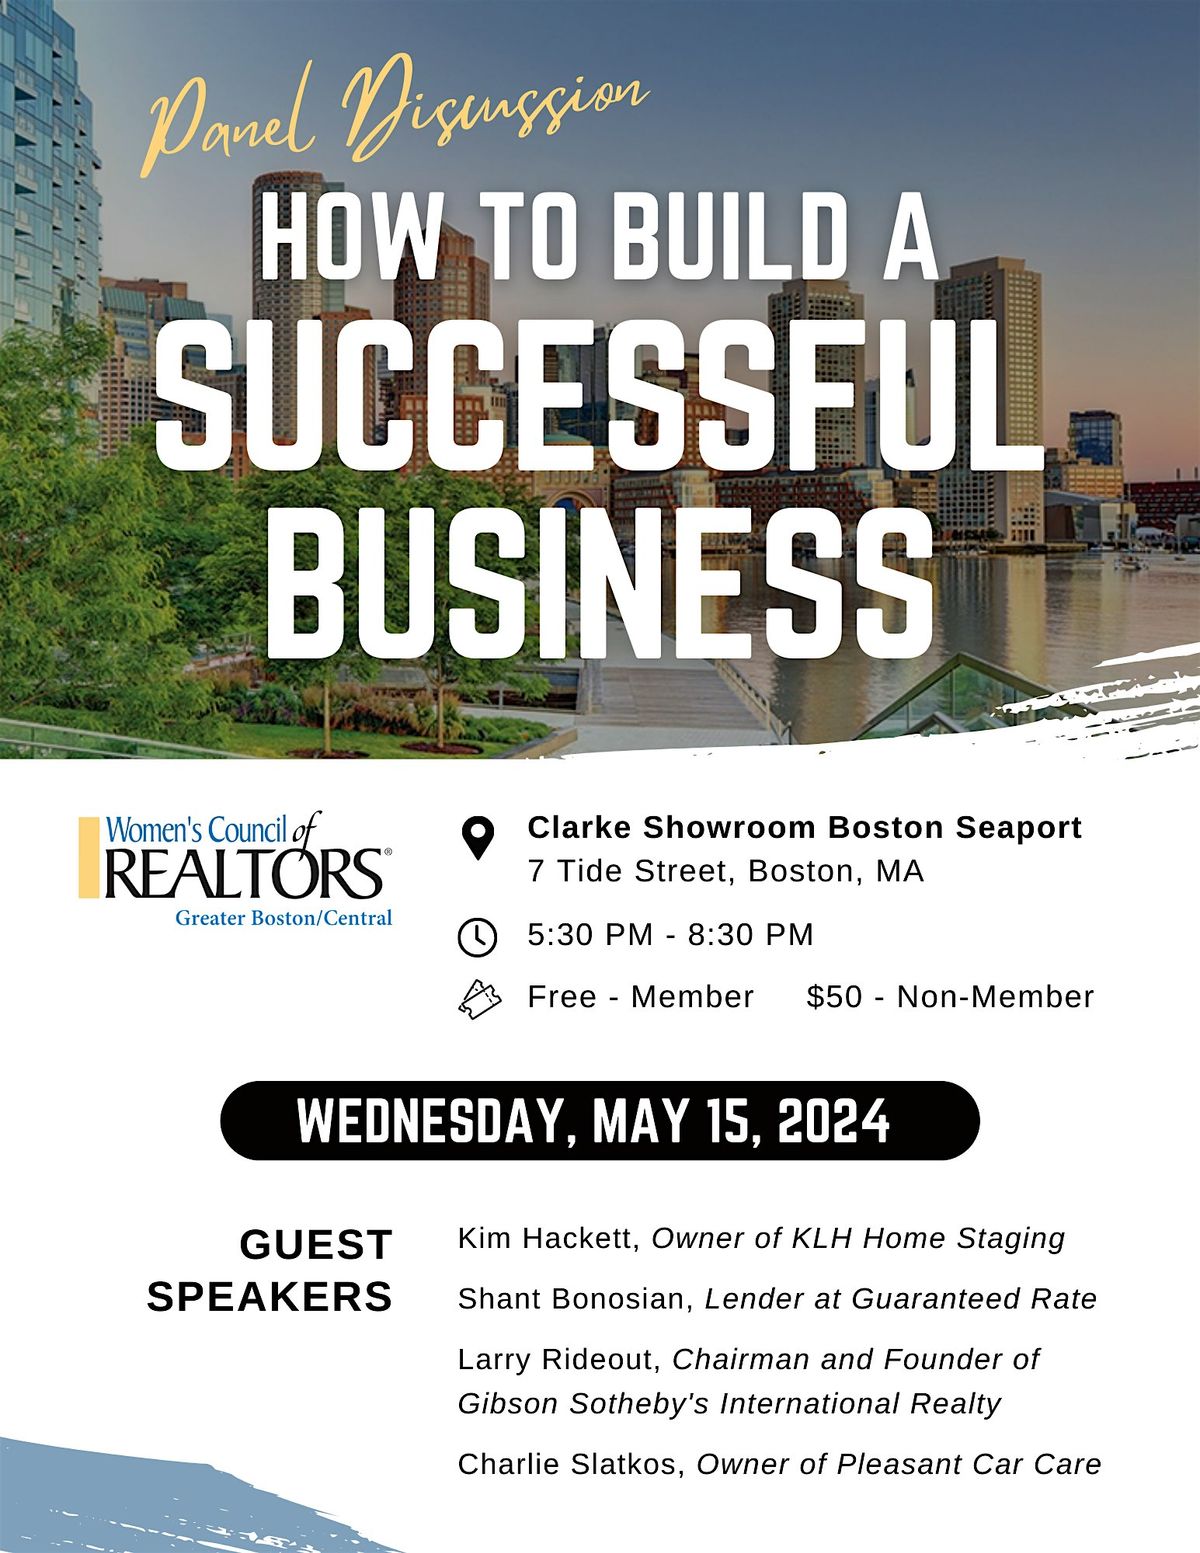 How to Build a Successful Business - Panel Discussion